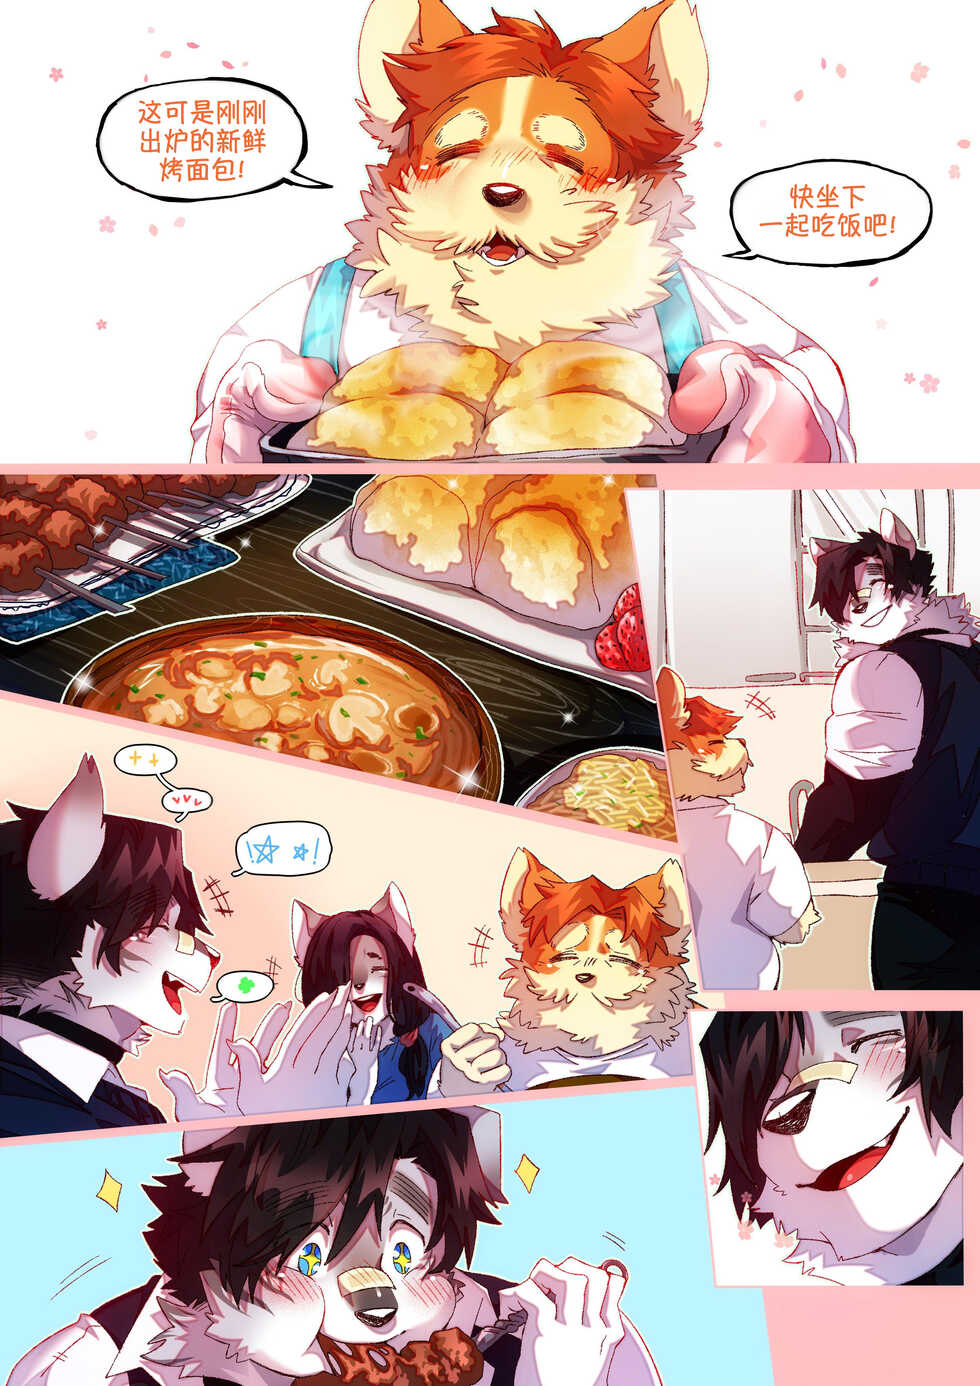 [BooBoo] Passionate Affection 深挚 [Chinese Ver.]  (On Going) - Page 21